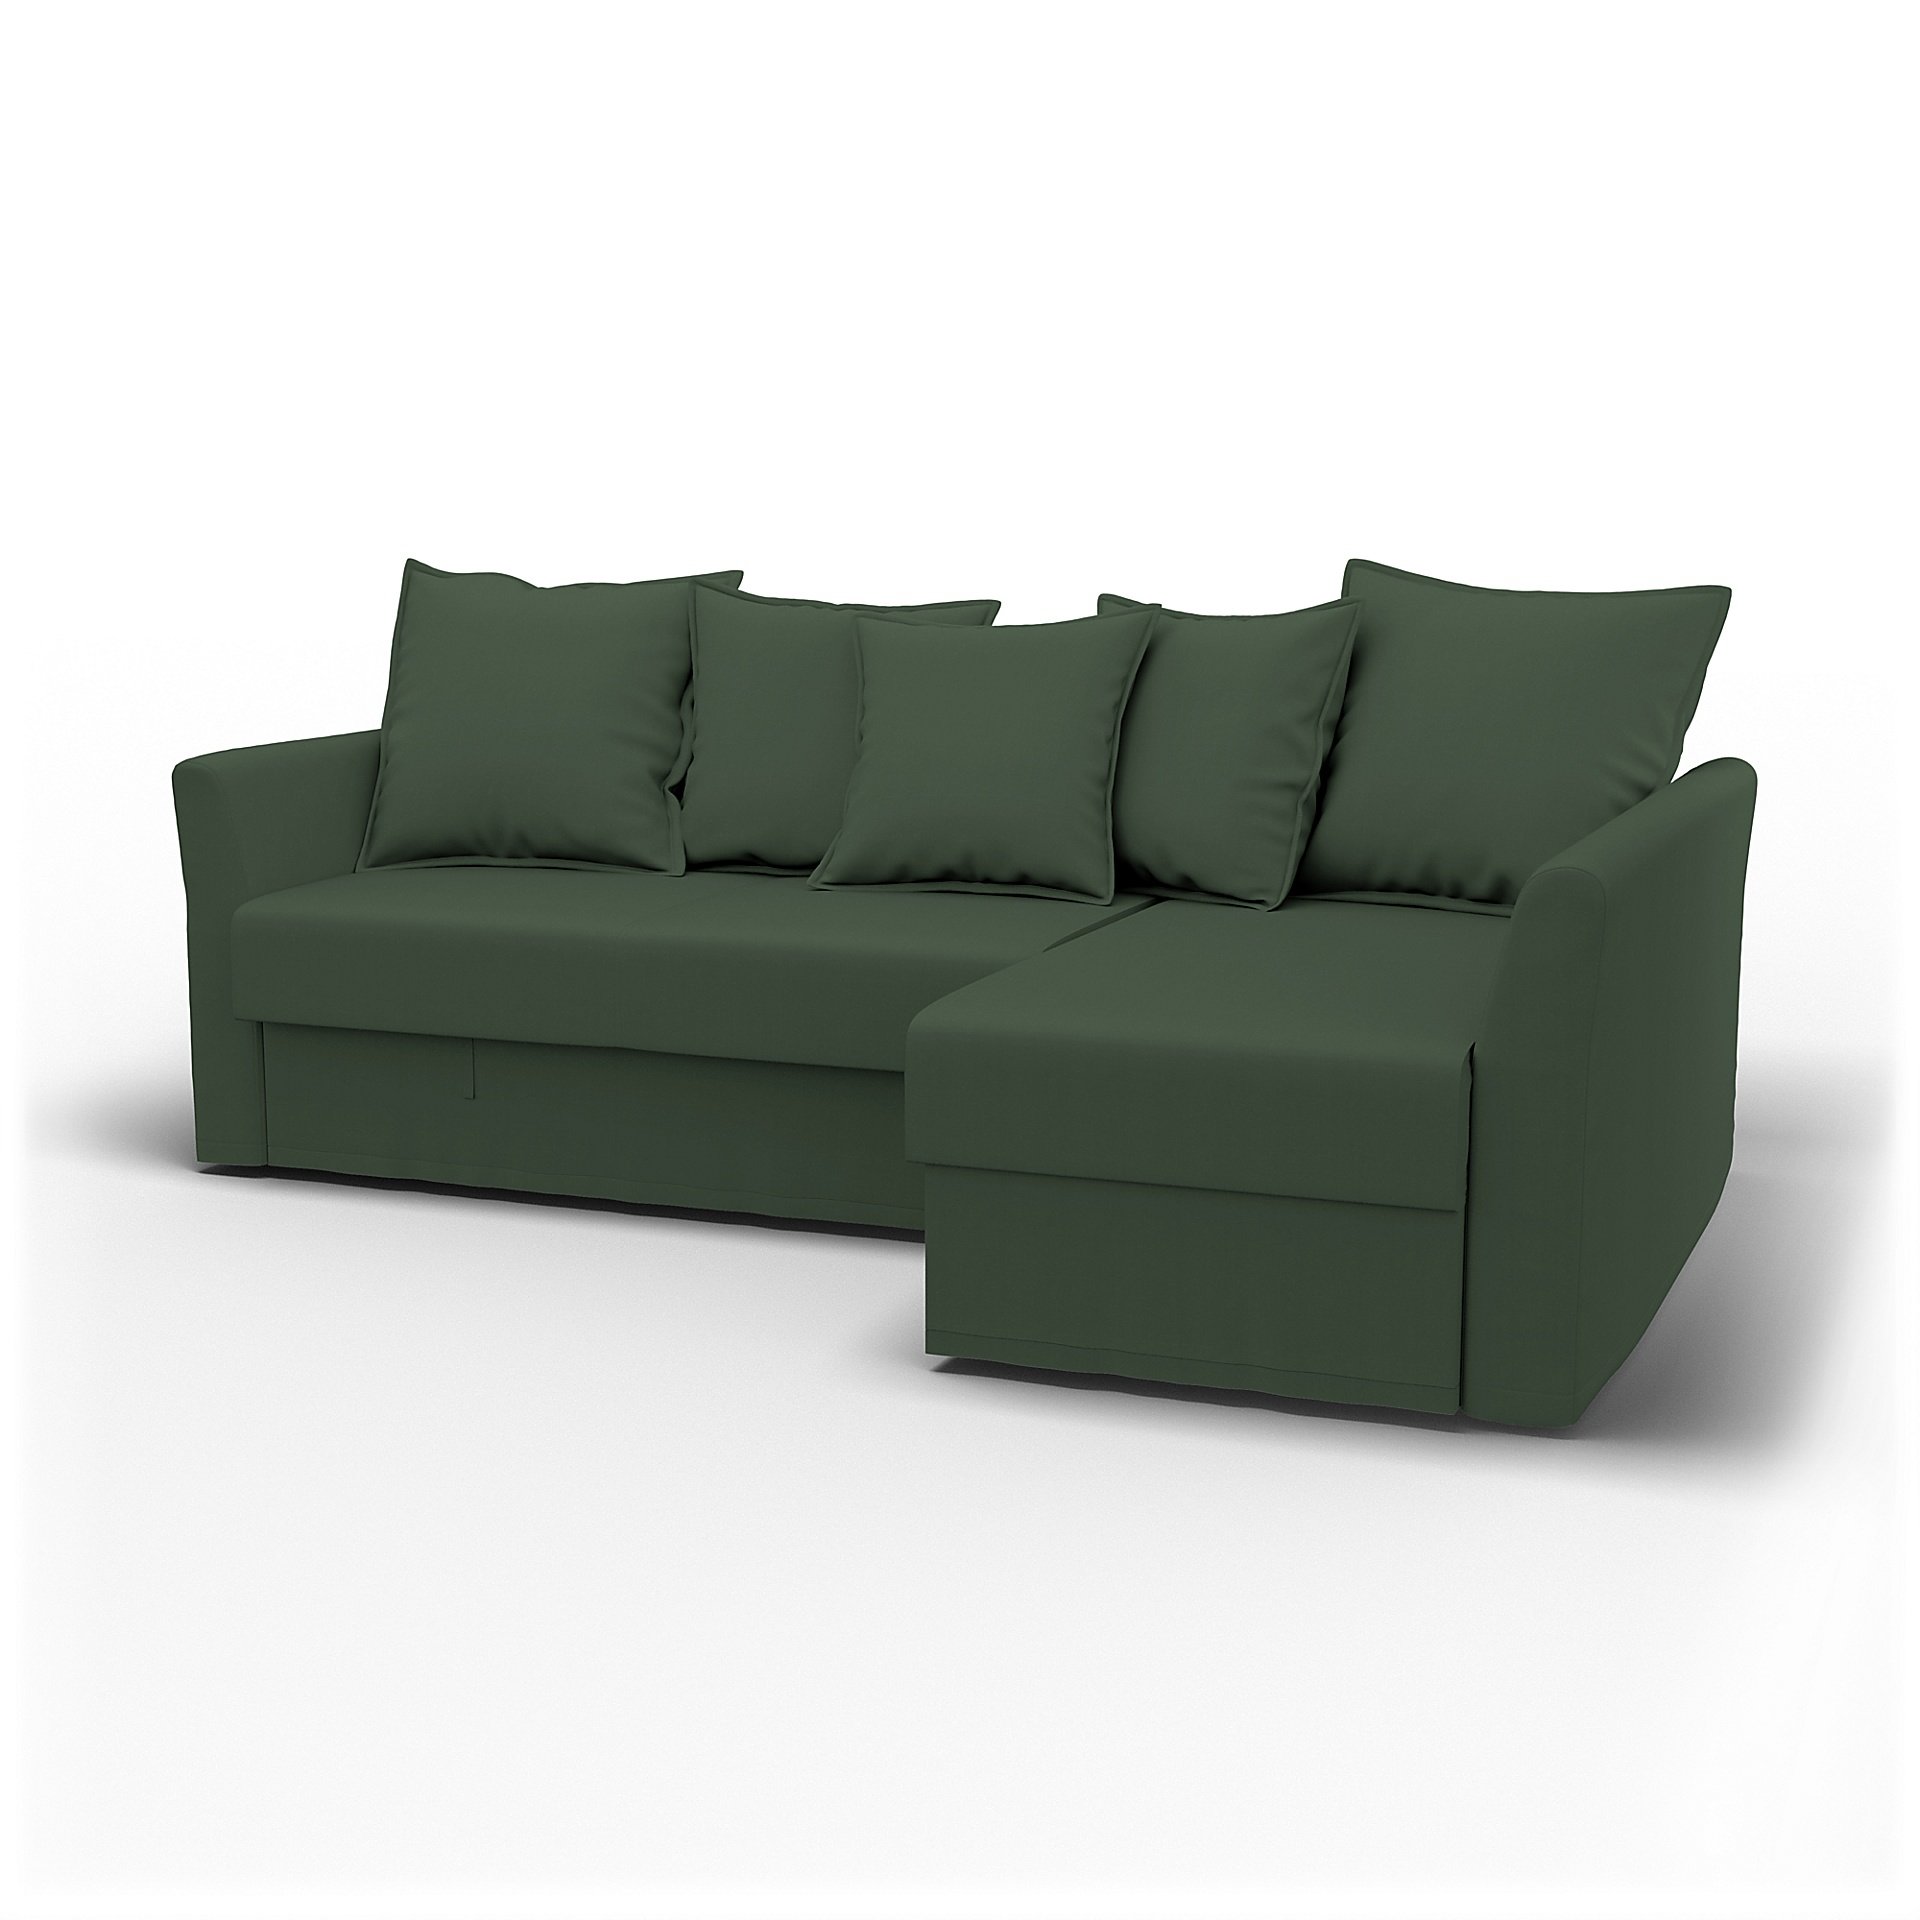 IKEA - Holmsund Sofabed with Chaiselongue, Thyme, Cotton - Bemz